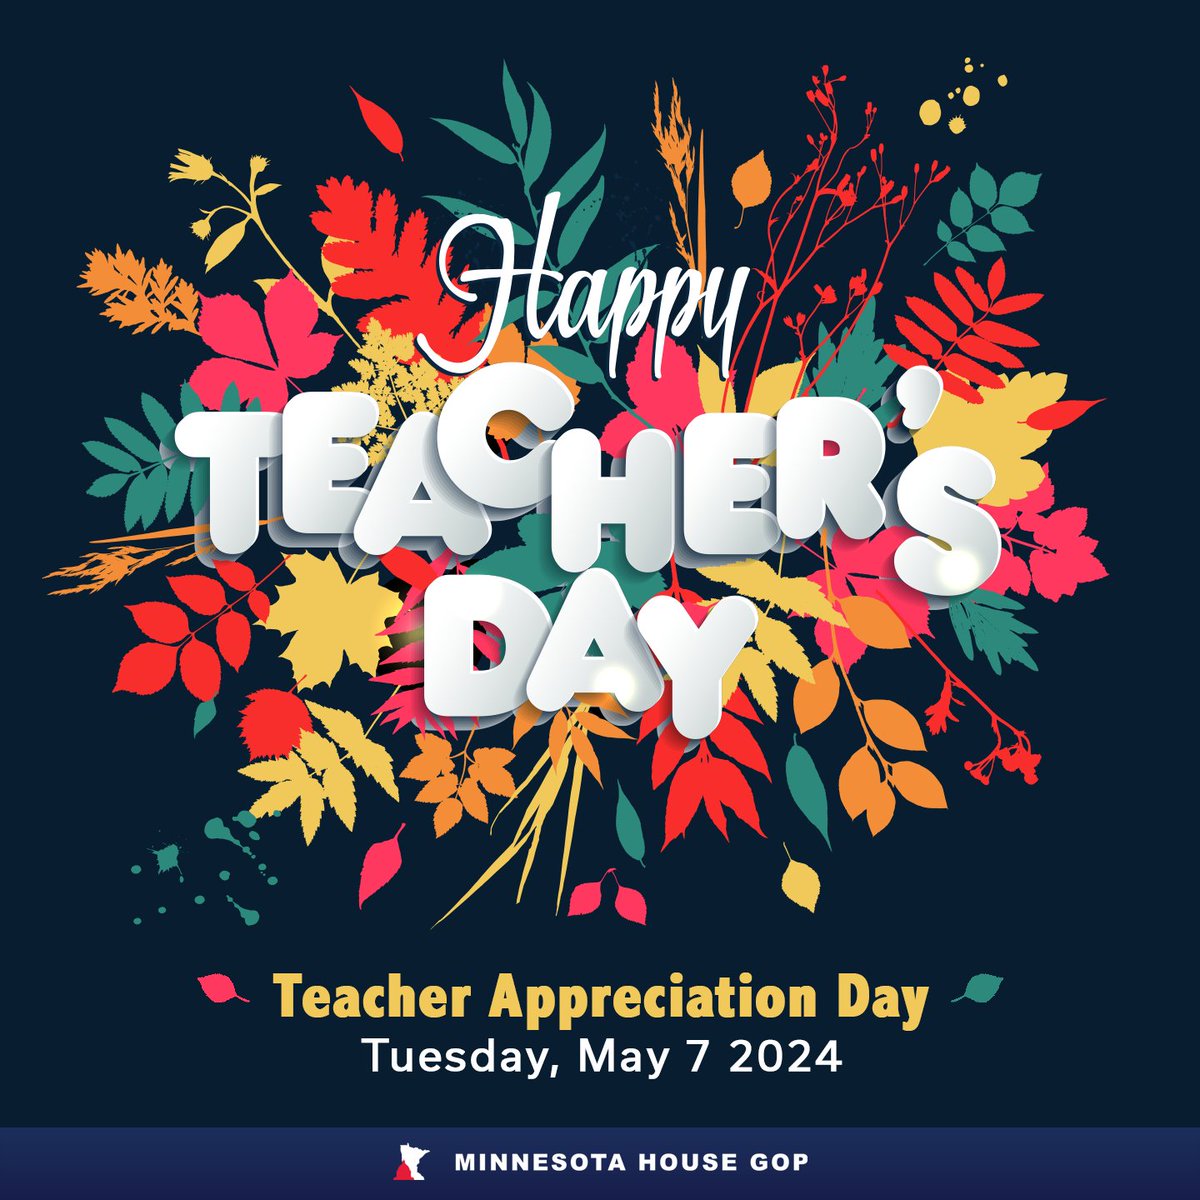 Here’s to those who inspire, empower, and shape young minds across Minnesota every day! Happy National Teacher Appreciation Day, and Teacher Appreciation Week! 🚌🍎#TeacherAppreciation #ThankATeacher #TeachersWeek